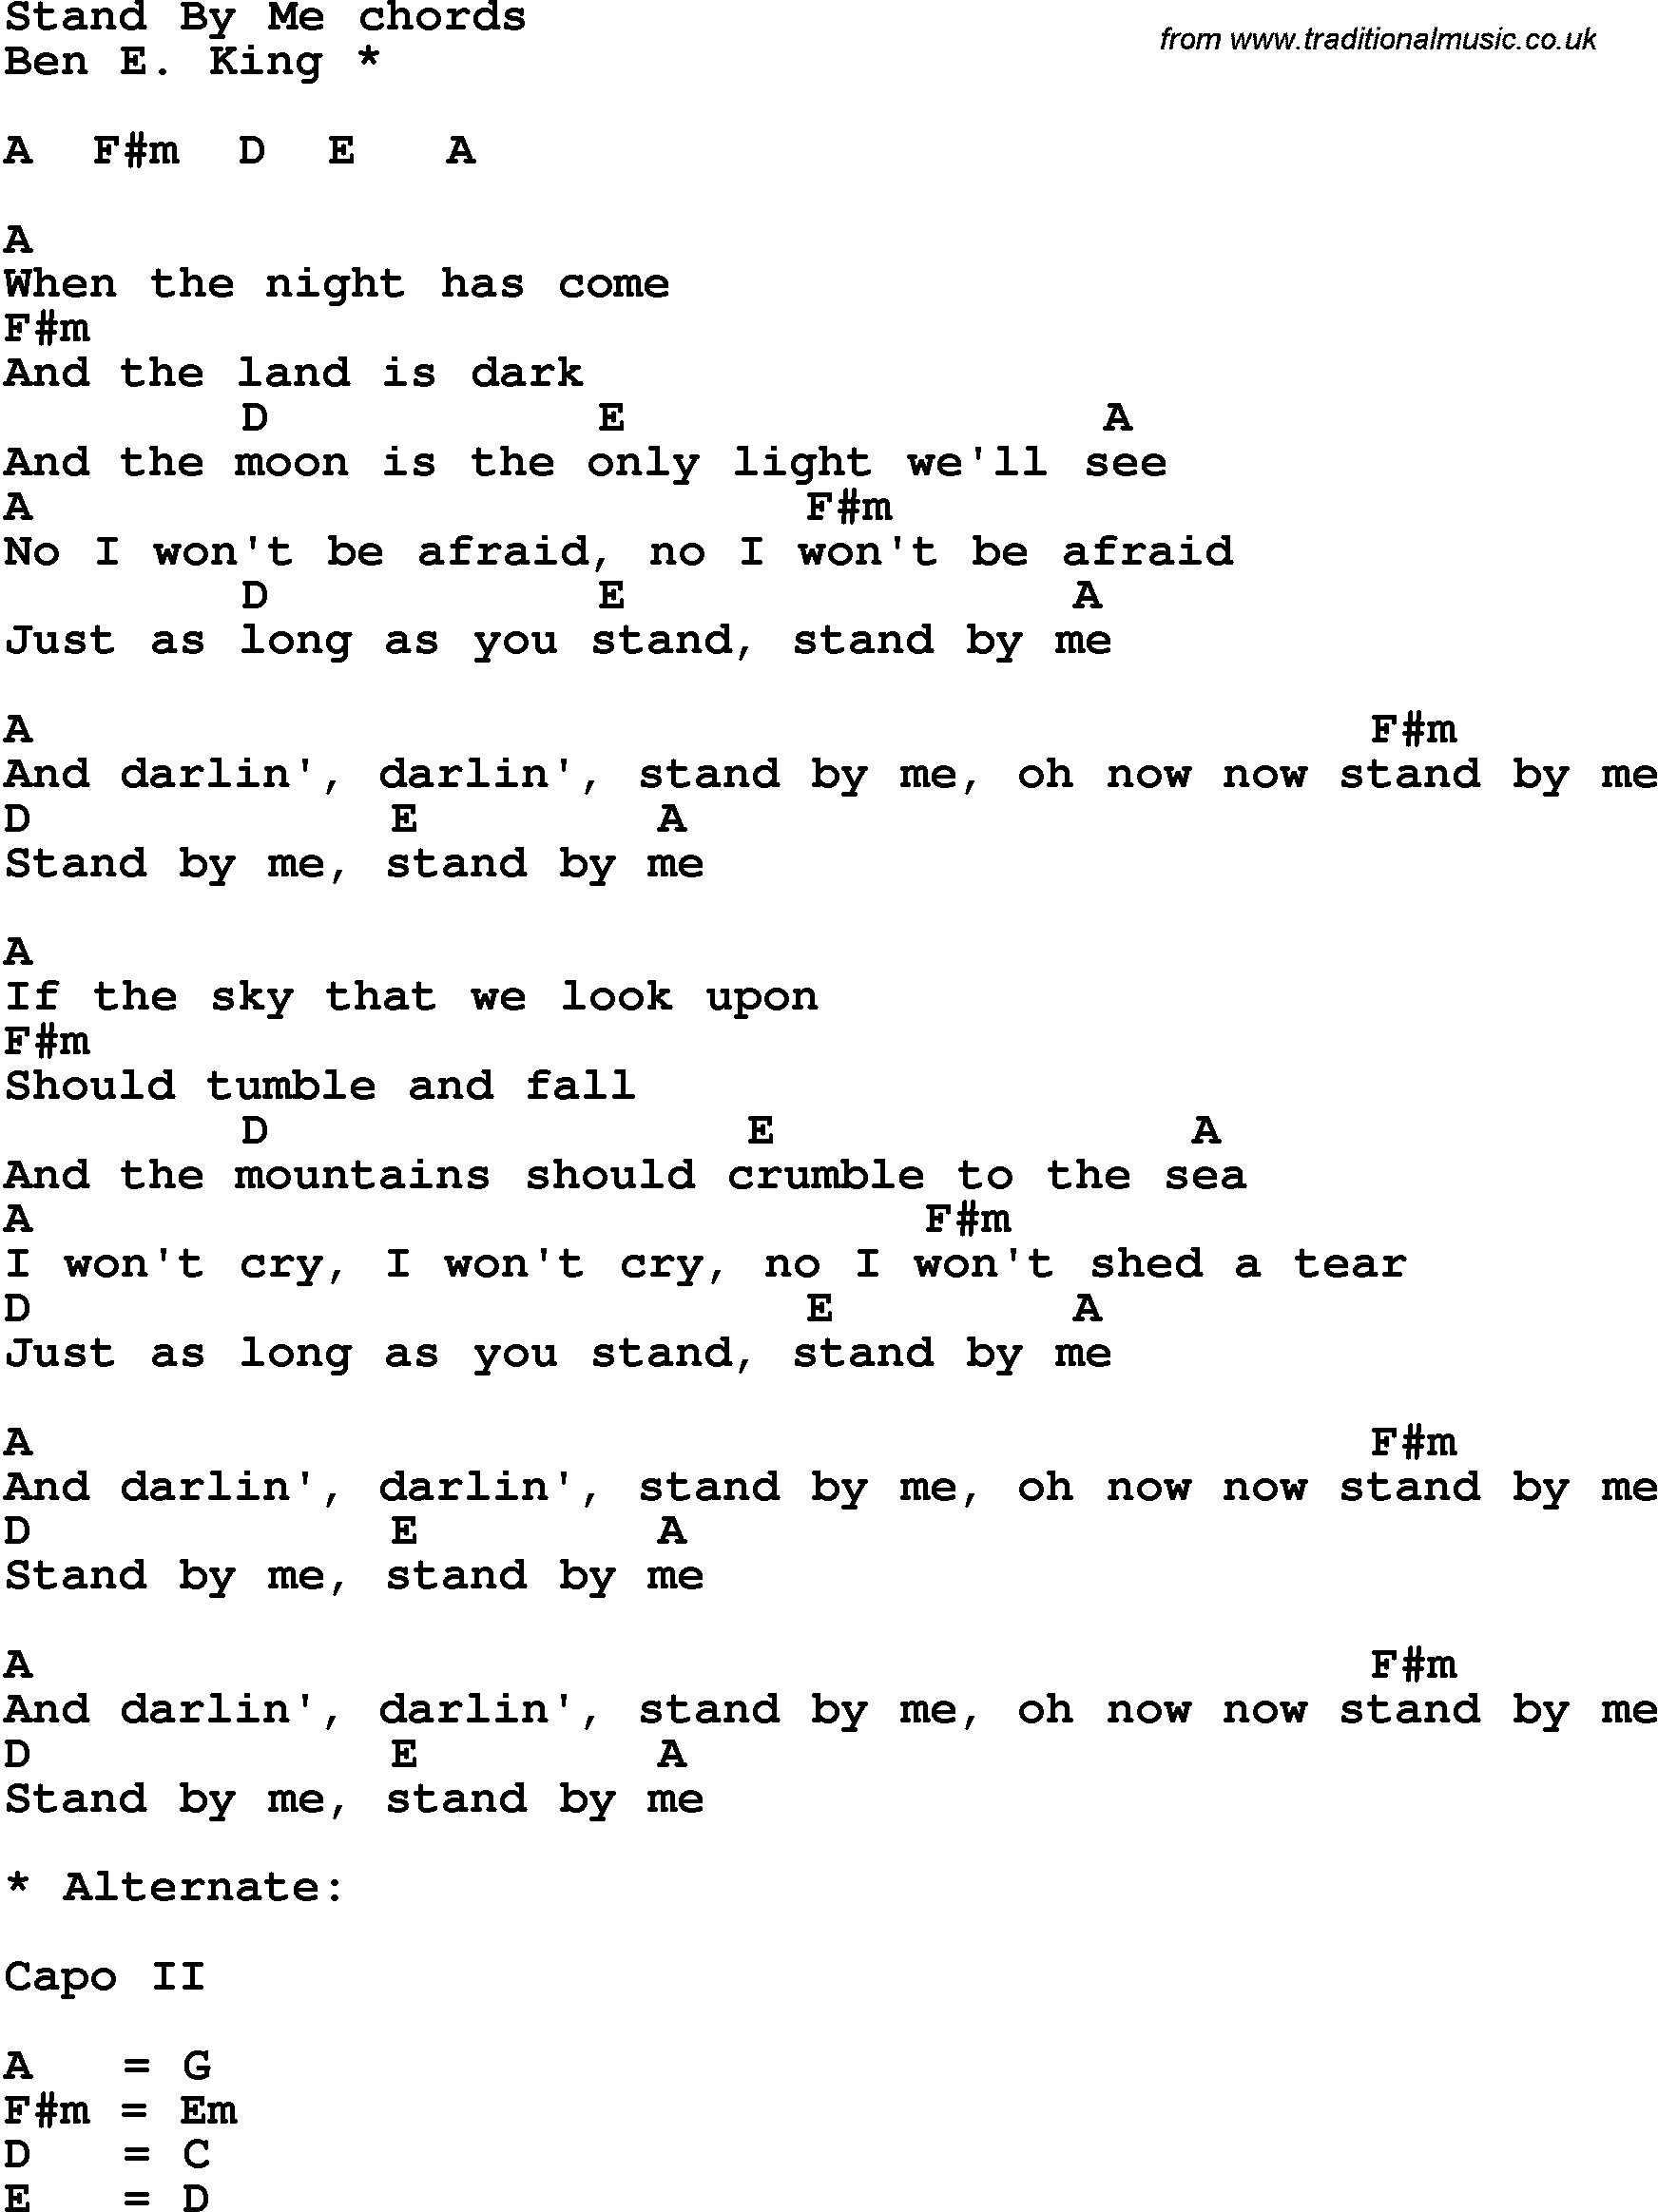 Song Lyrics with guitar chords for Stand By Me